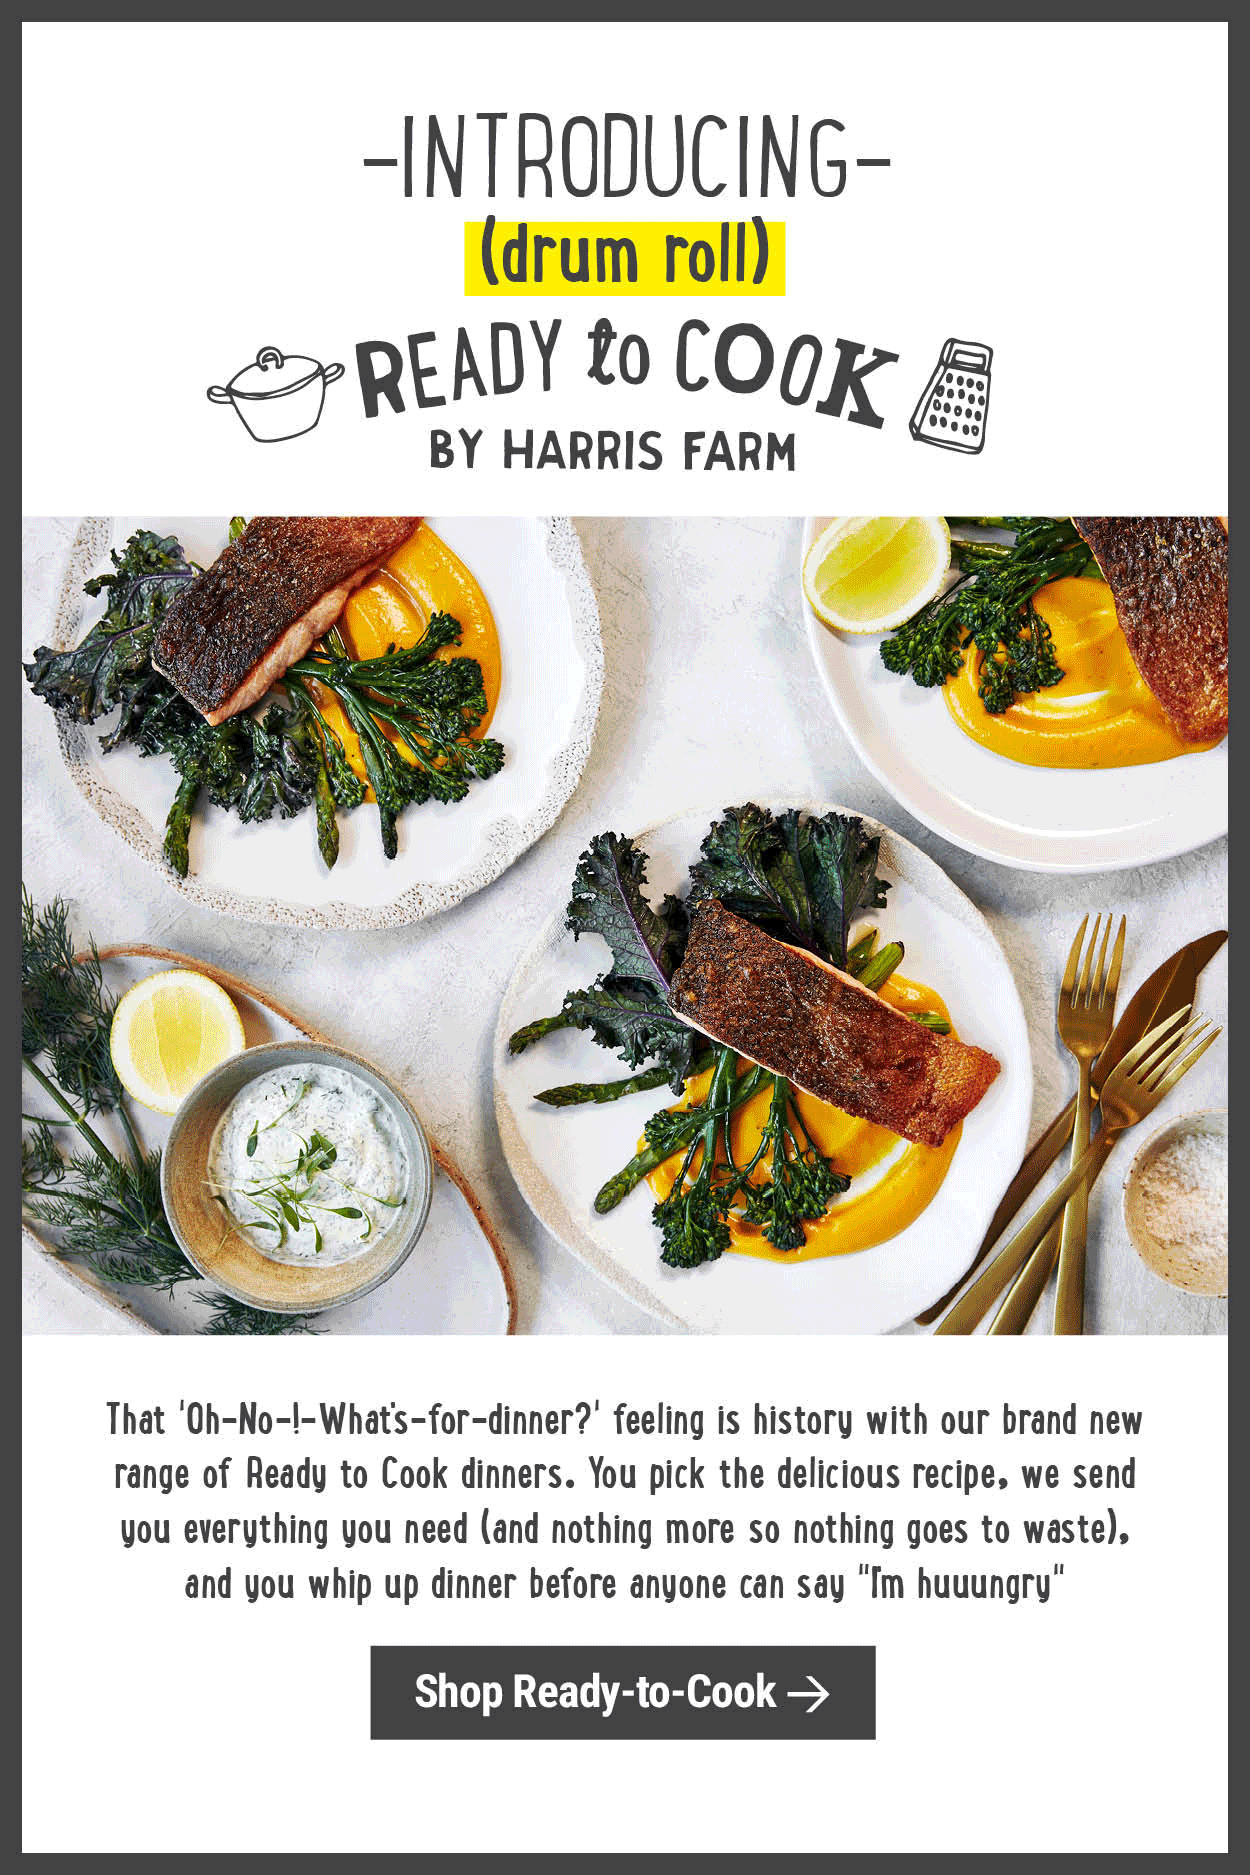 Ready to Cook | Harris Farm Meal Kits